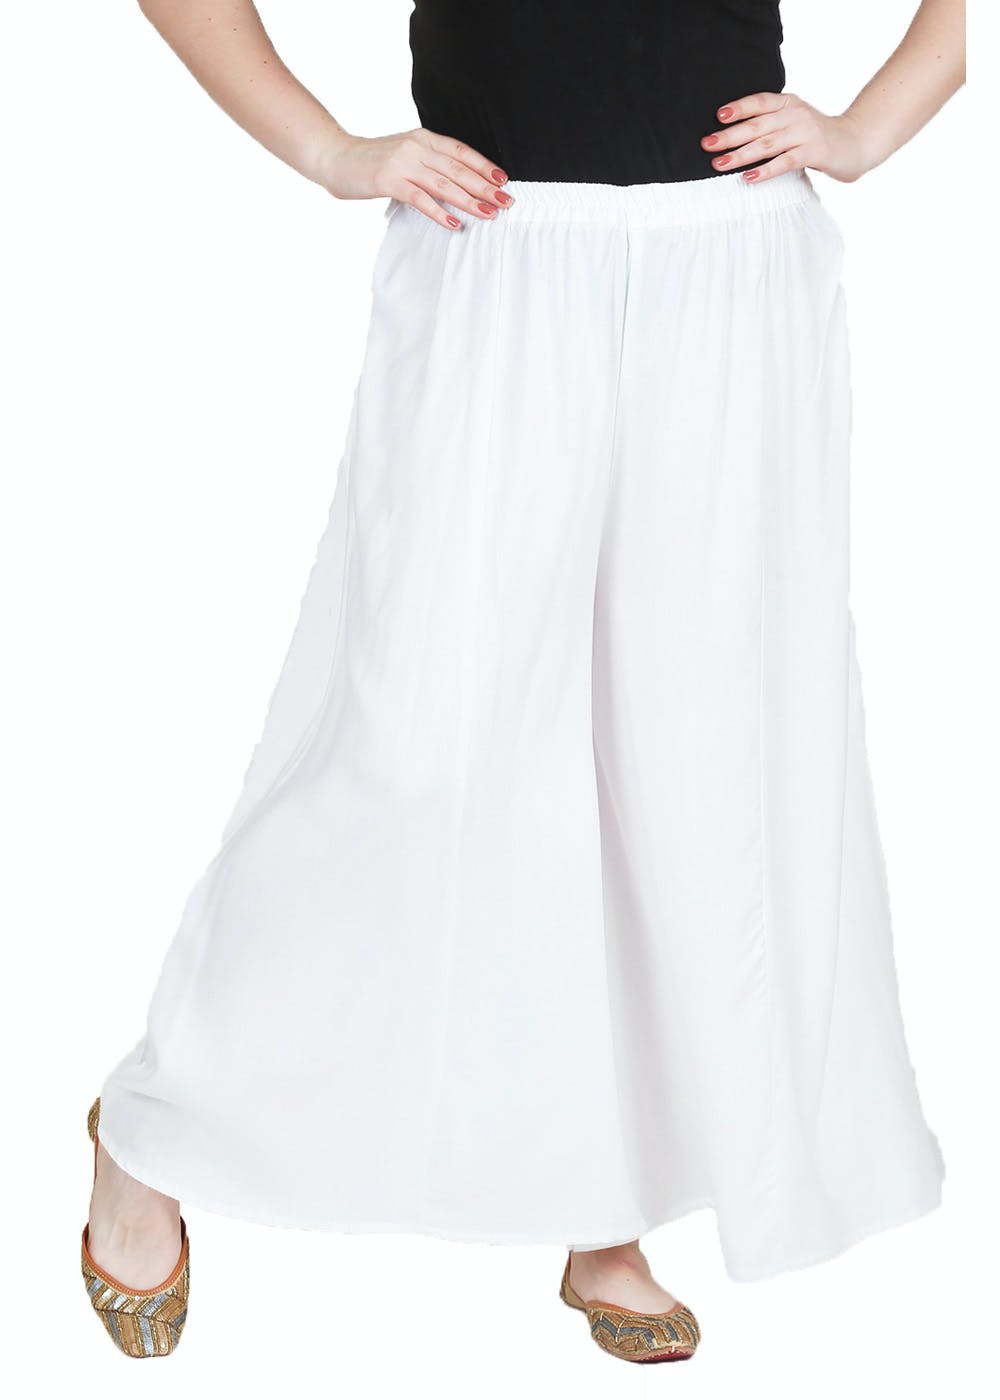 CREW and TAILOR - VOLUTED SKORT | White/grey